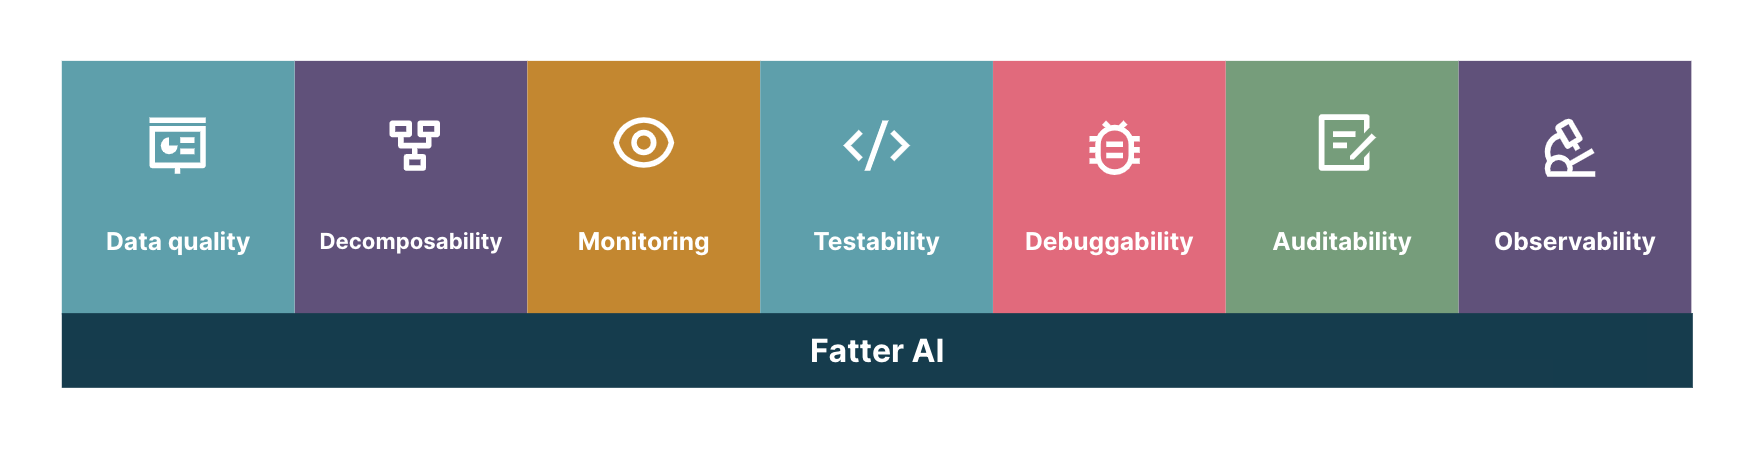 key tenets of fatter ai systems